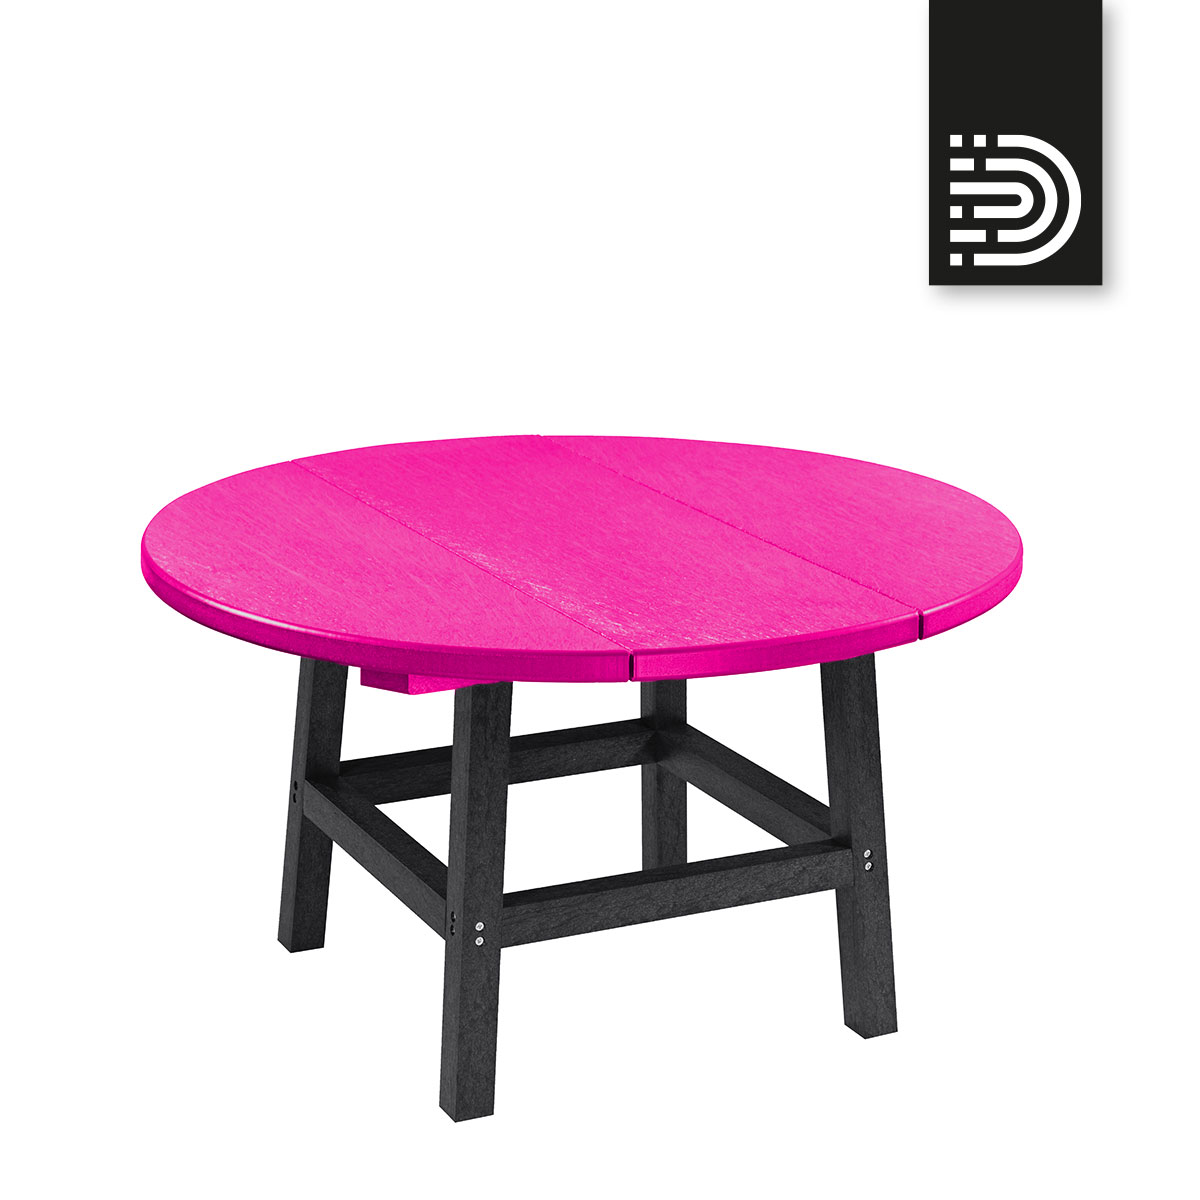 Cocktail Table in 14/10 - TB01+TT03/02